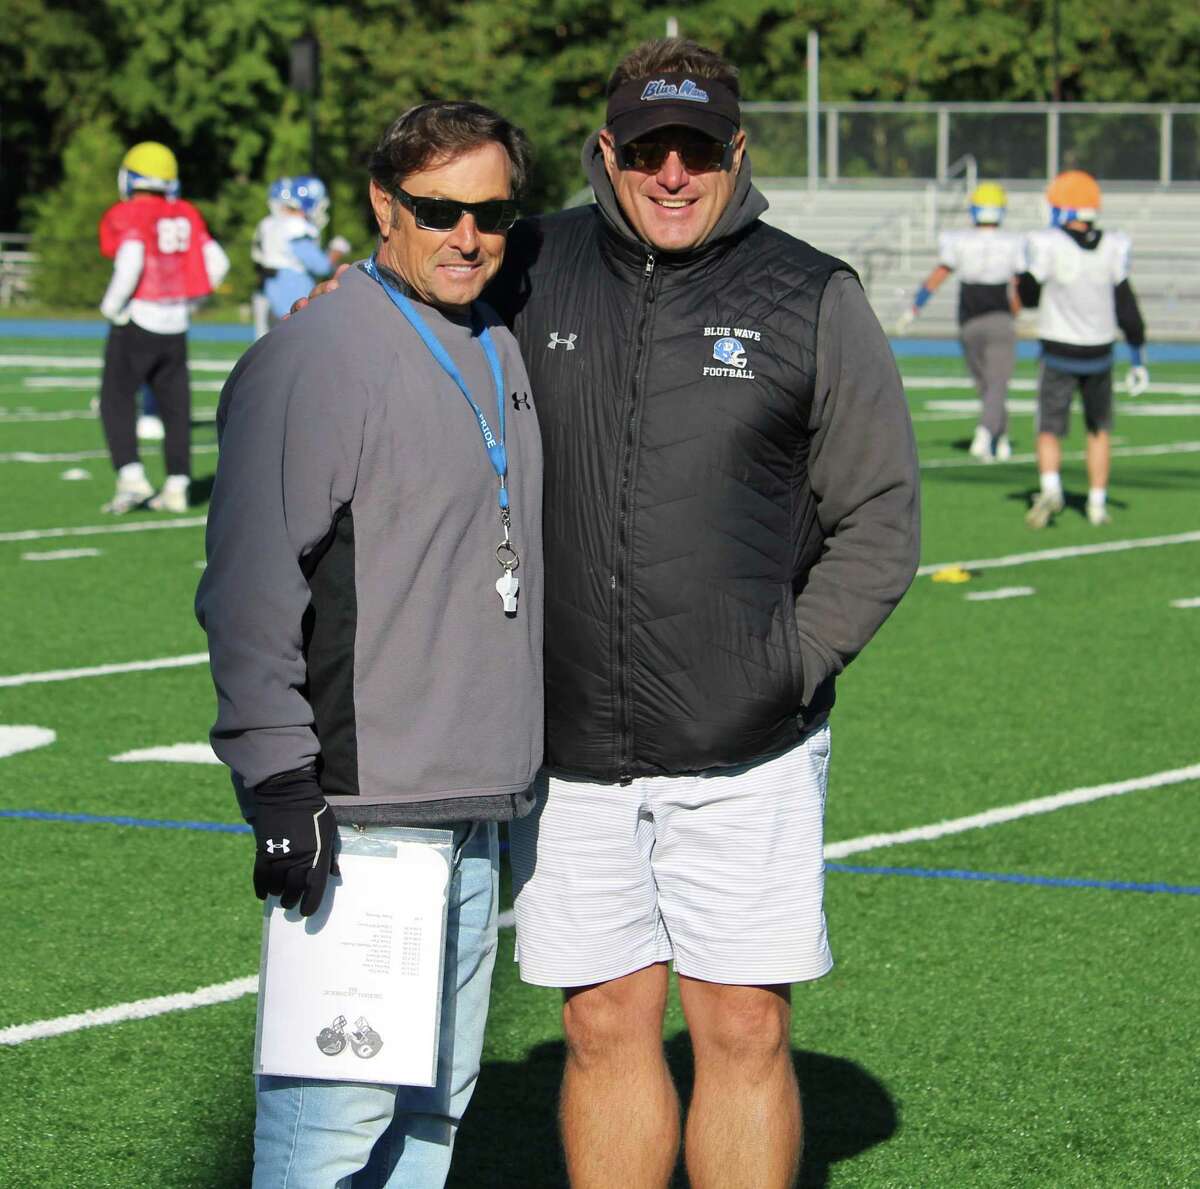 Darien coach Rob Trifone (left) and Defensive Coordinator Mike Forget pose at practice on Thursday, Oct. 18, 2018 at Darien High School in Darien, Conn.